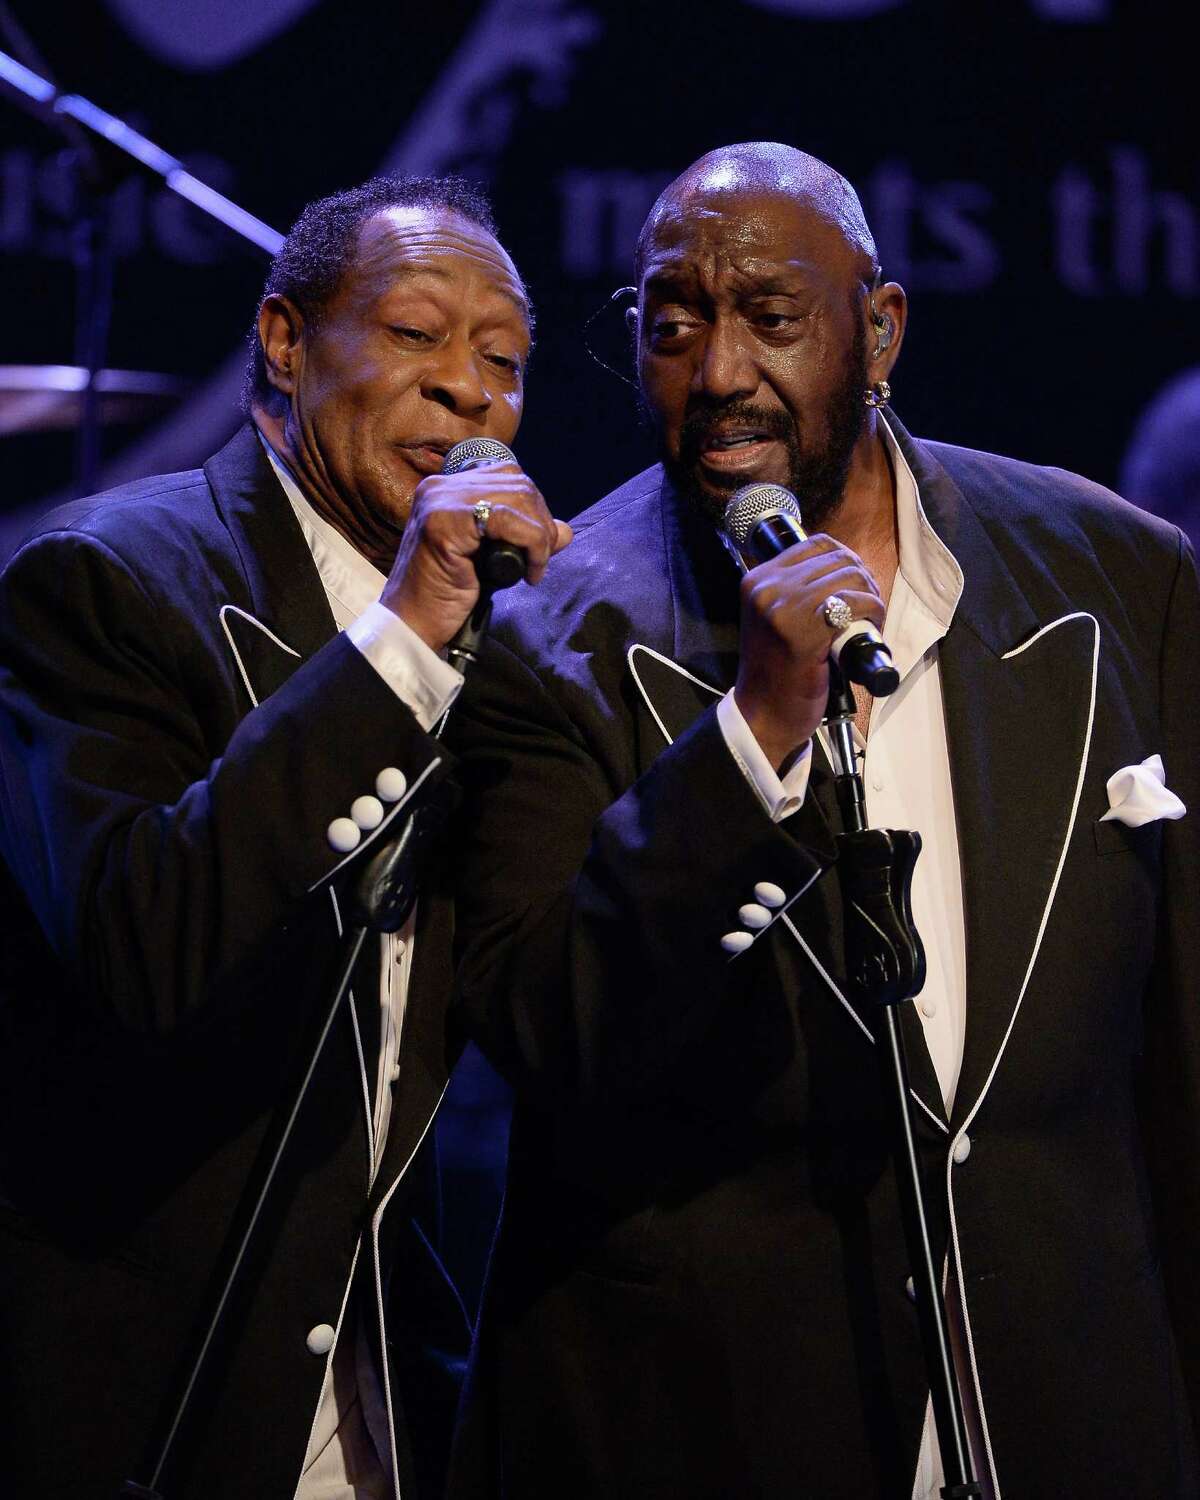 AGOURA HILLS, CA - MARCH 20: Musicians Joe Herndon (L) and Otis Williams perform during The Temptations appearance at The Canyon Club on March 20, 2015 in Agoura Hills, California. (Photo by Michael Schwartz/WireImage)